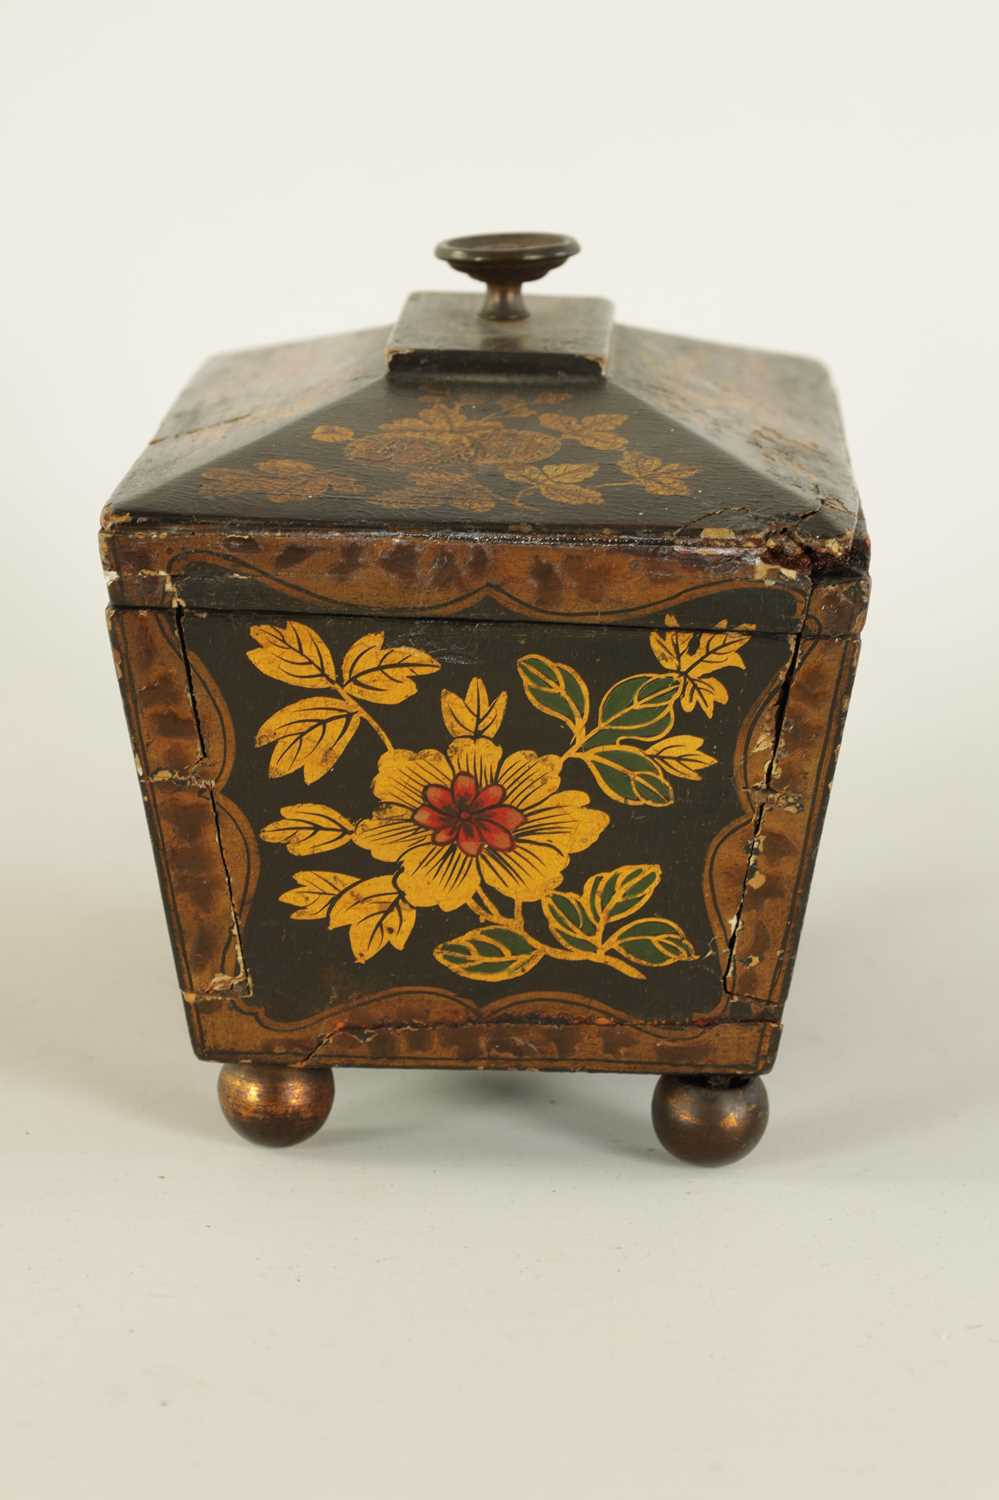 A LATE GEORGIAN CHINOISERIE DECORATED BLACK LACQUER SARCOPHAGUS TEA CADDY - Image 5 of 8